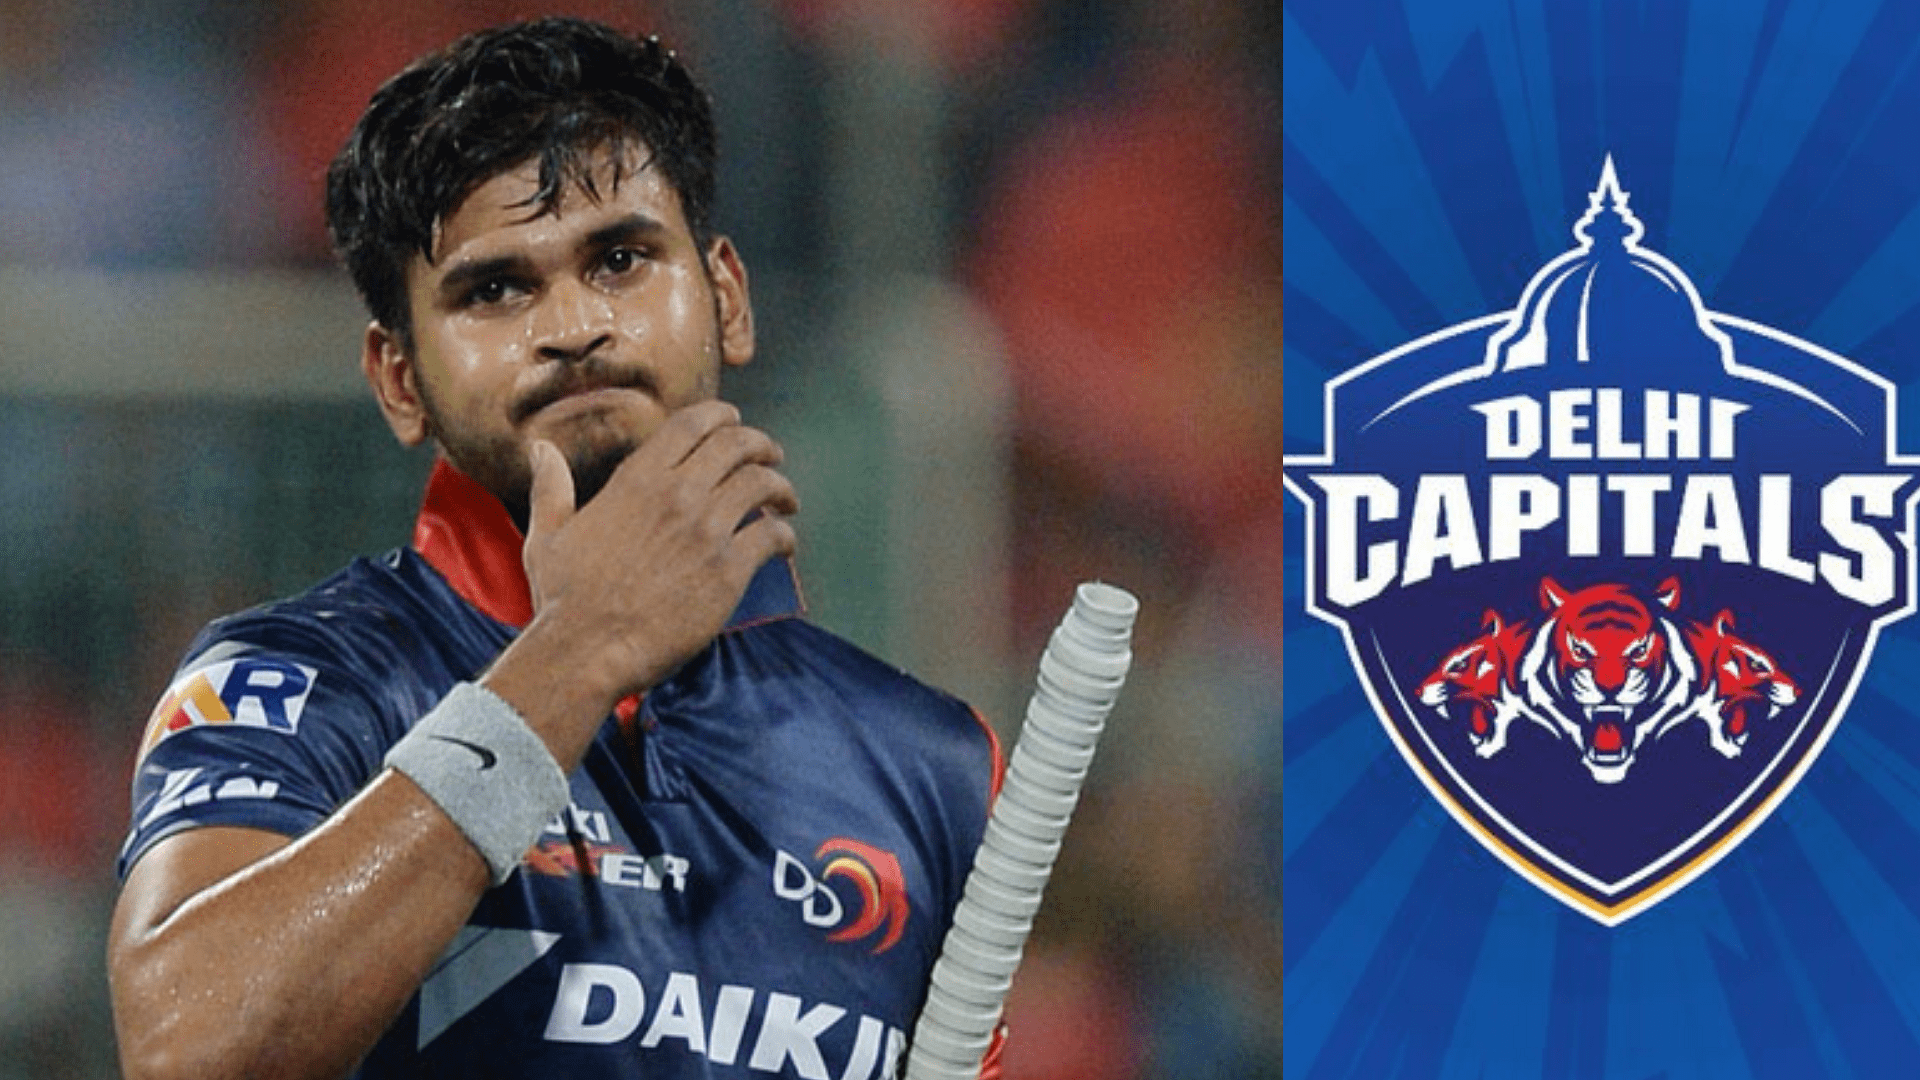 IPL 2019 Auction DC: Auction Purse, Players Released and Retained For Delhi Capitals